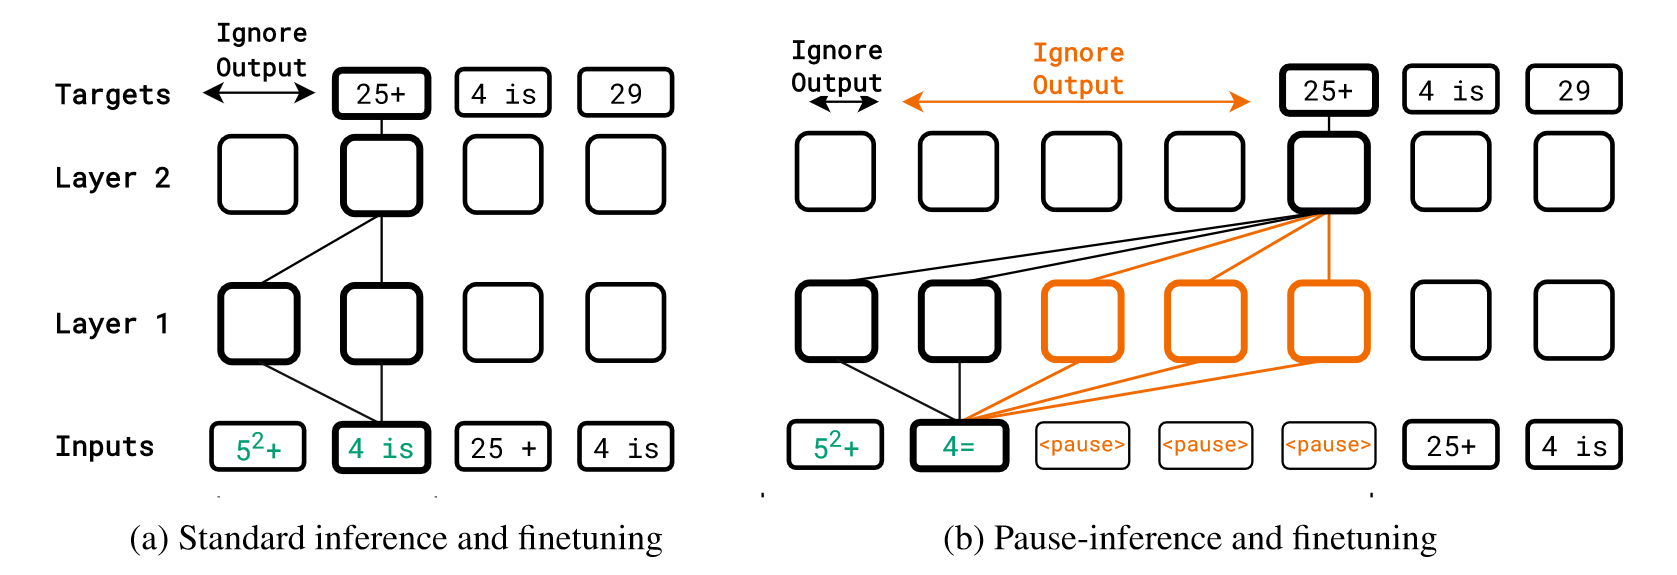 Figure 1: Standard vs. pause-inference (and finetuning).